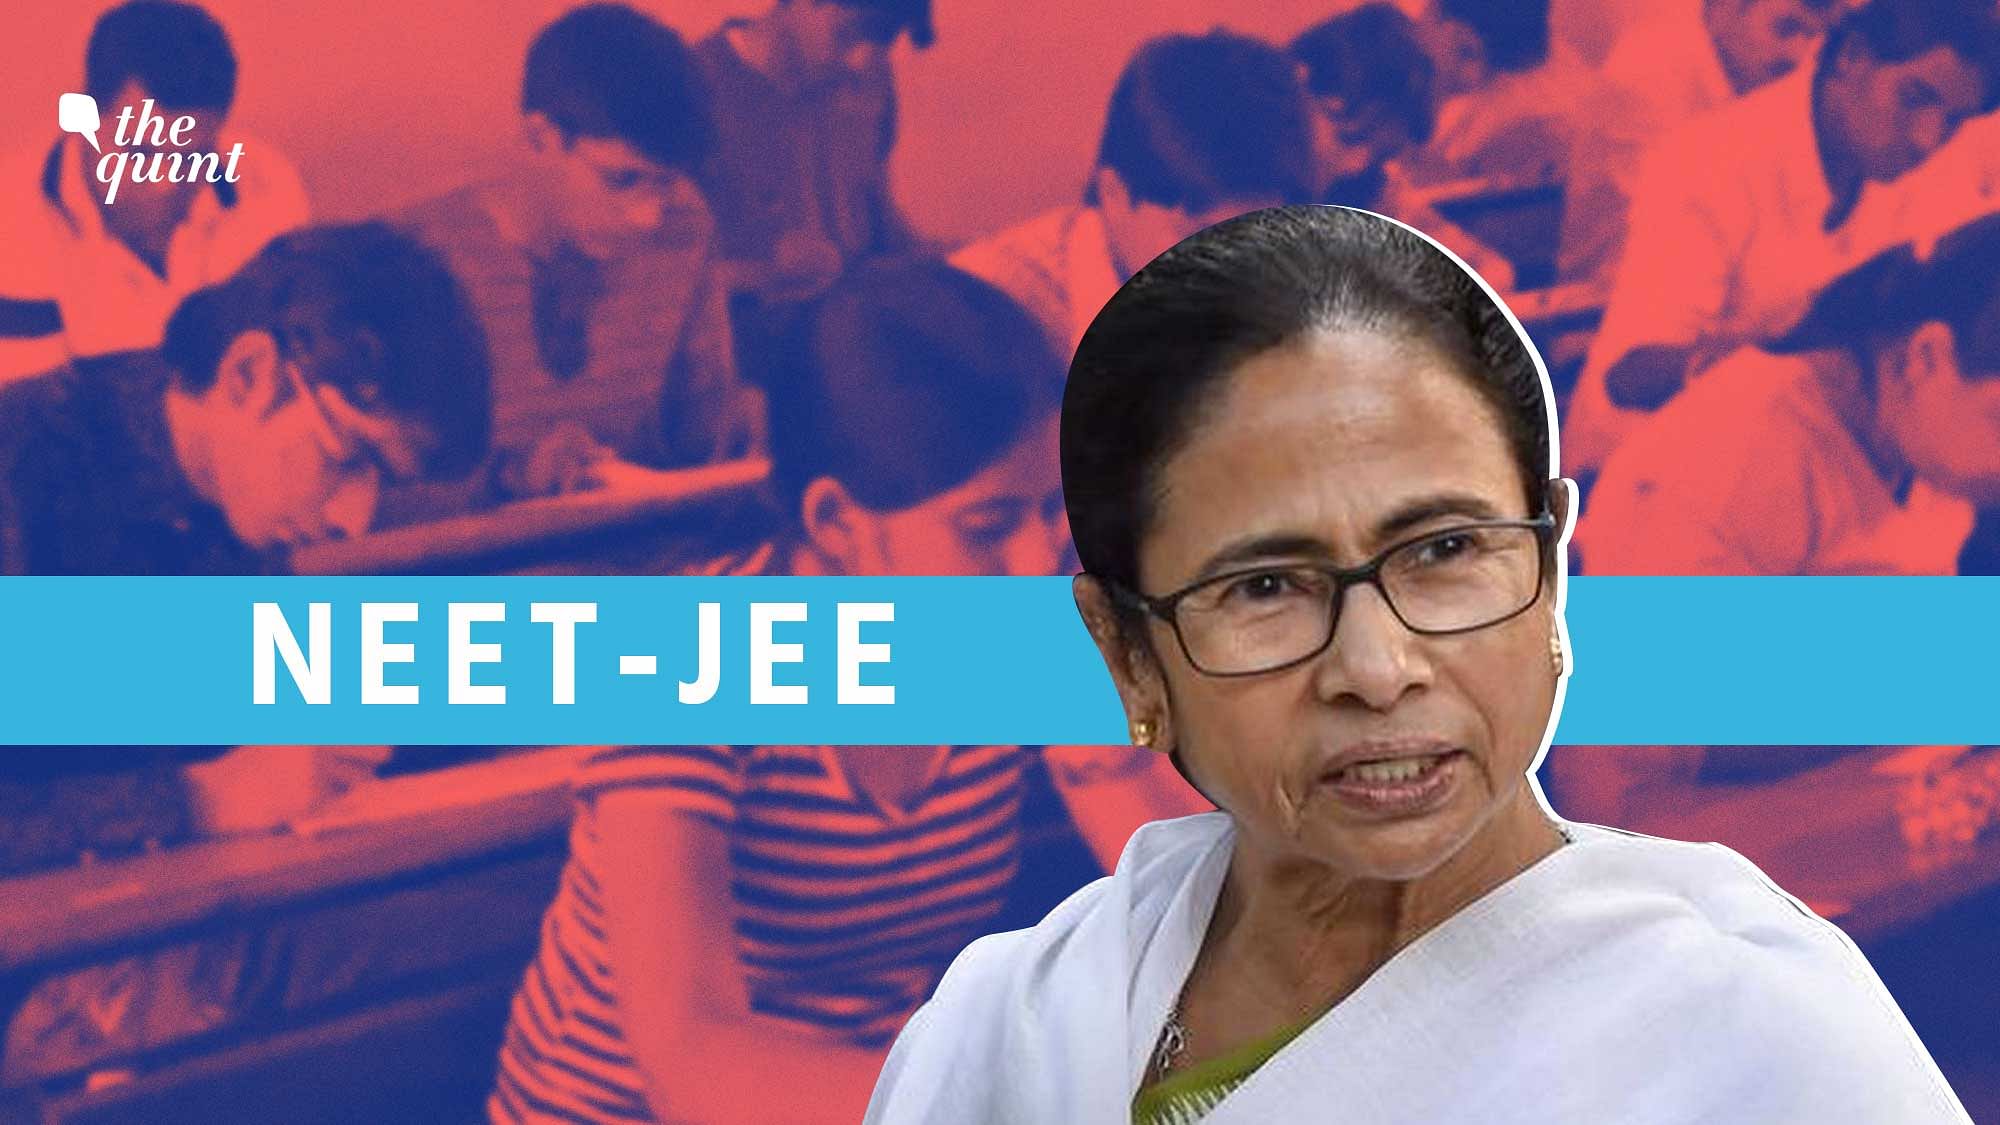 It was a meeting called by Sonia Gandhi, but just a few minutes into the opposition meeting on NEET-JEE, West Bengal Chief Minister Mamata Banerjee was asked to take over and convene by the Congress supremo.